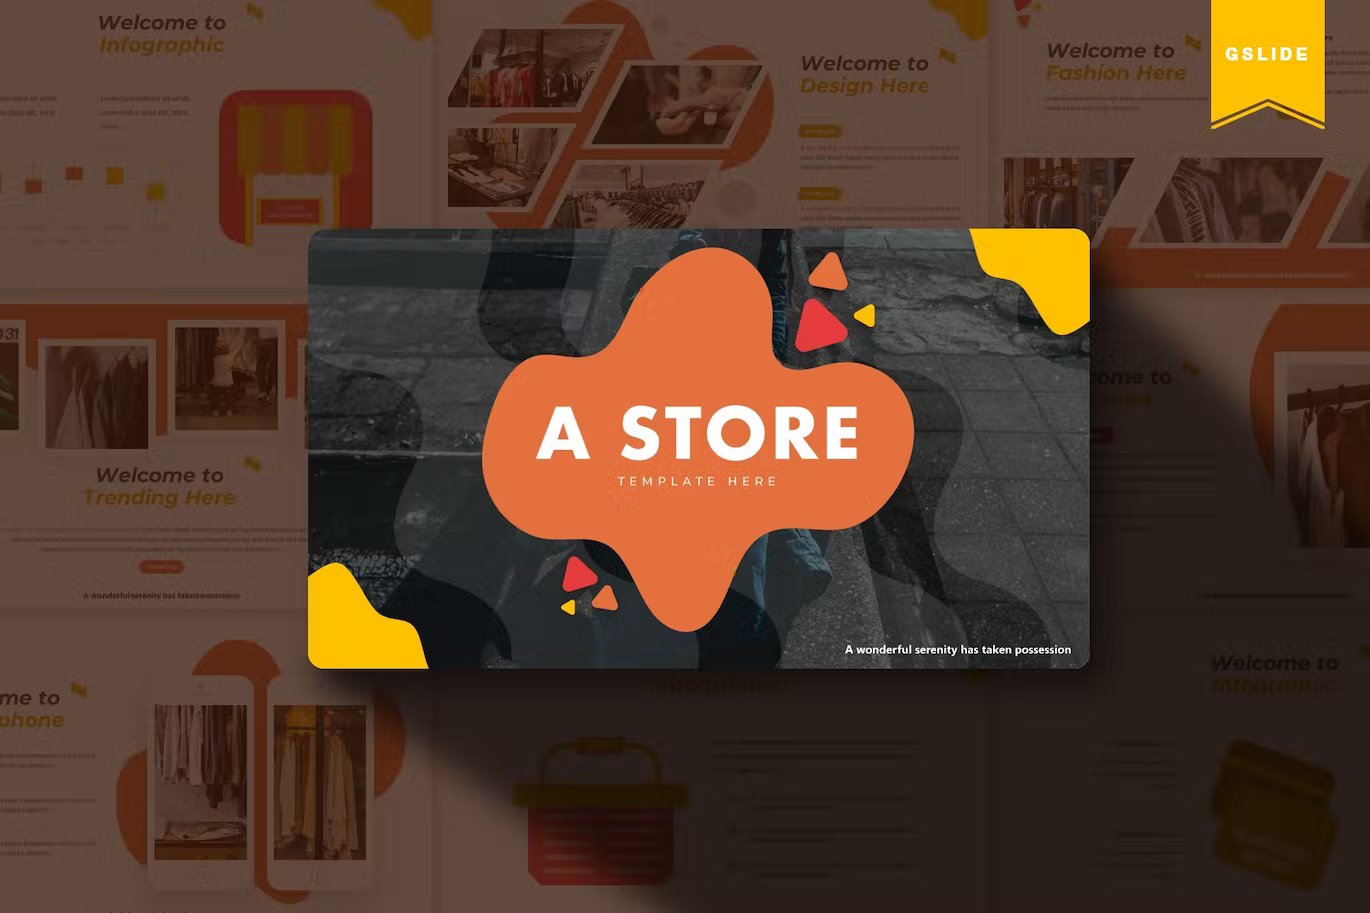 Google slides template with white lettering "A STORE" in orange, yellow, red and dark gray on the background of different presentation templates.